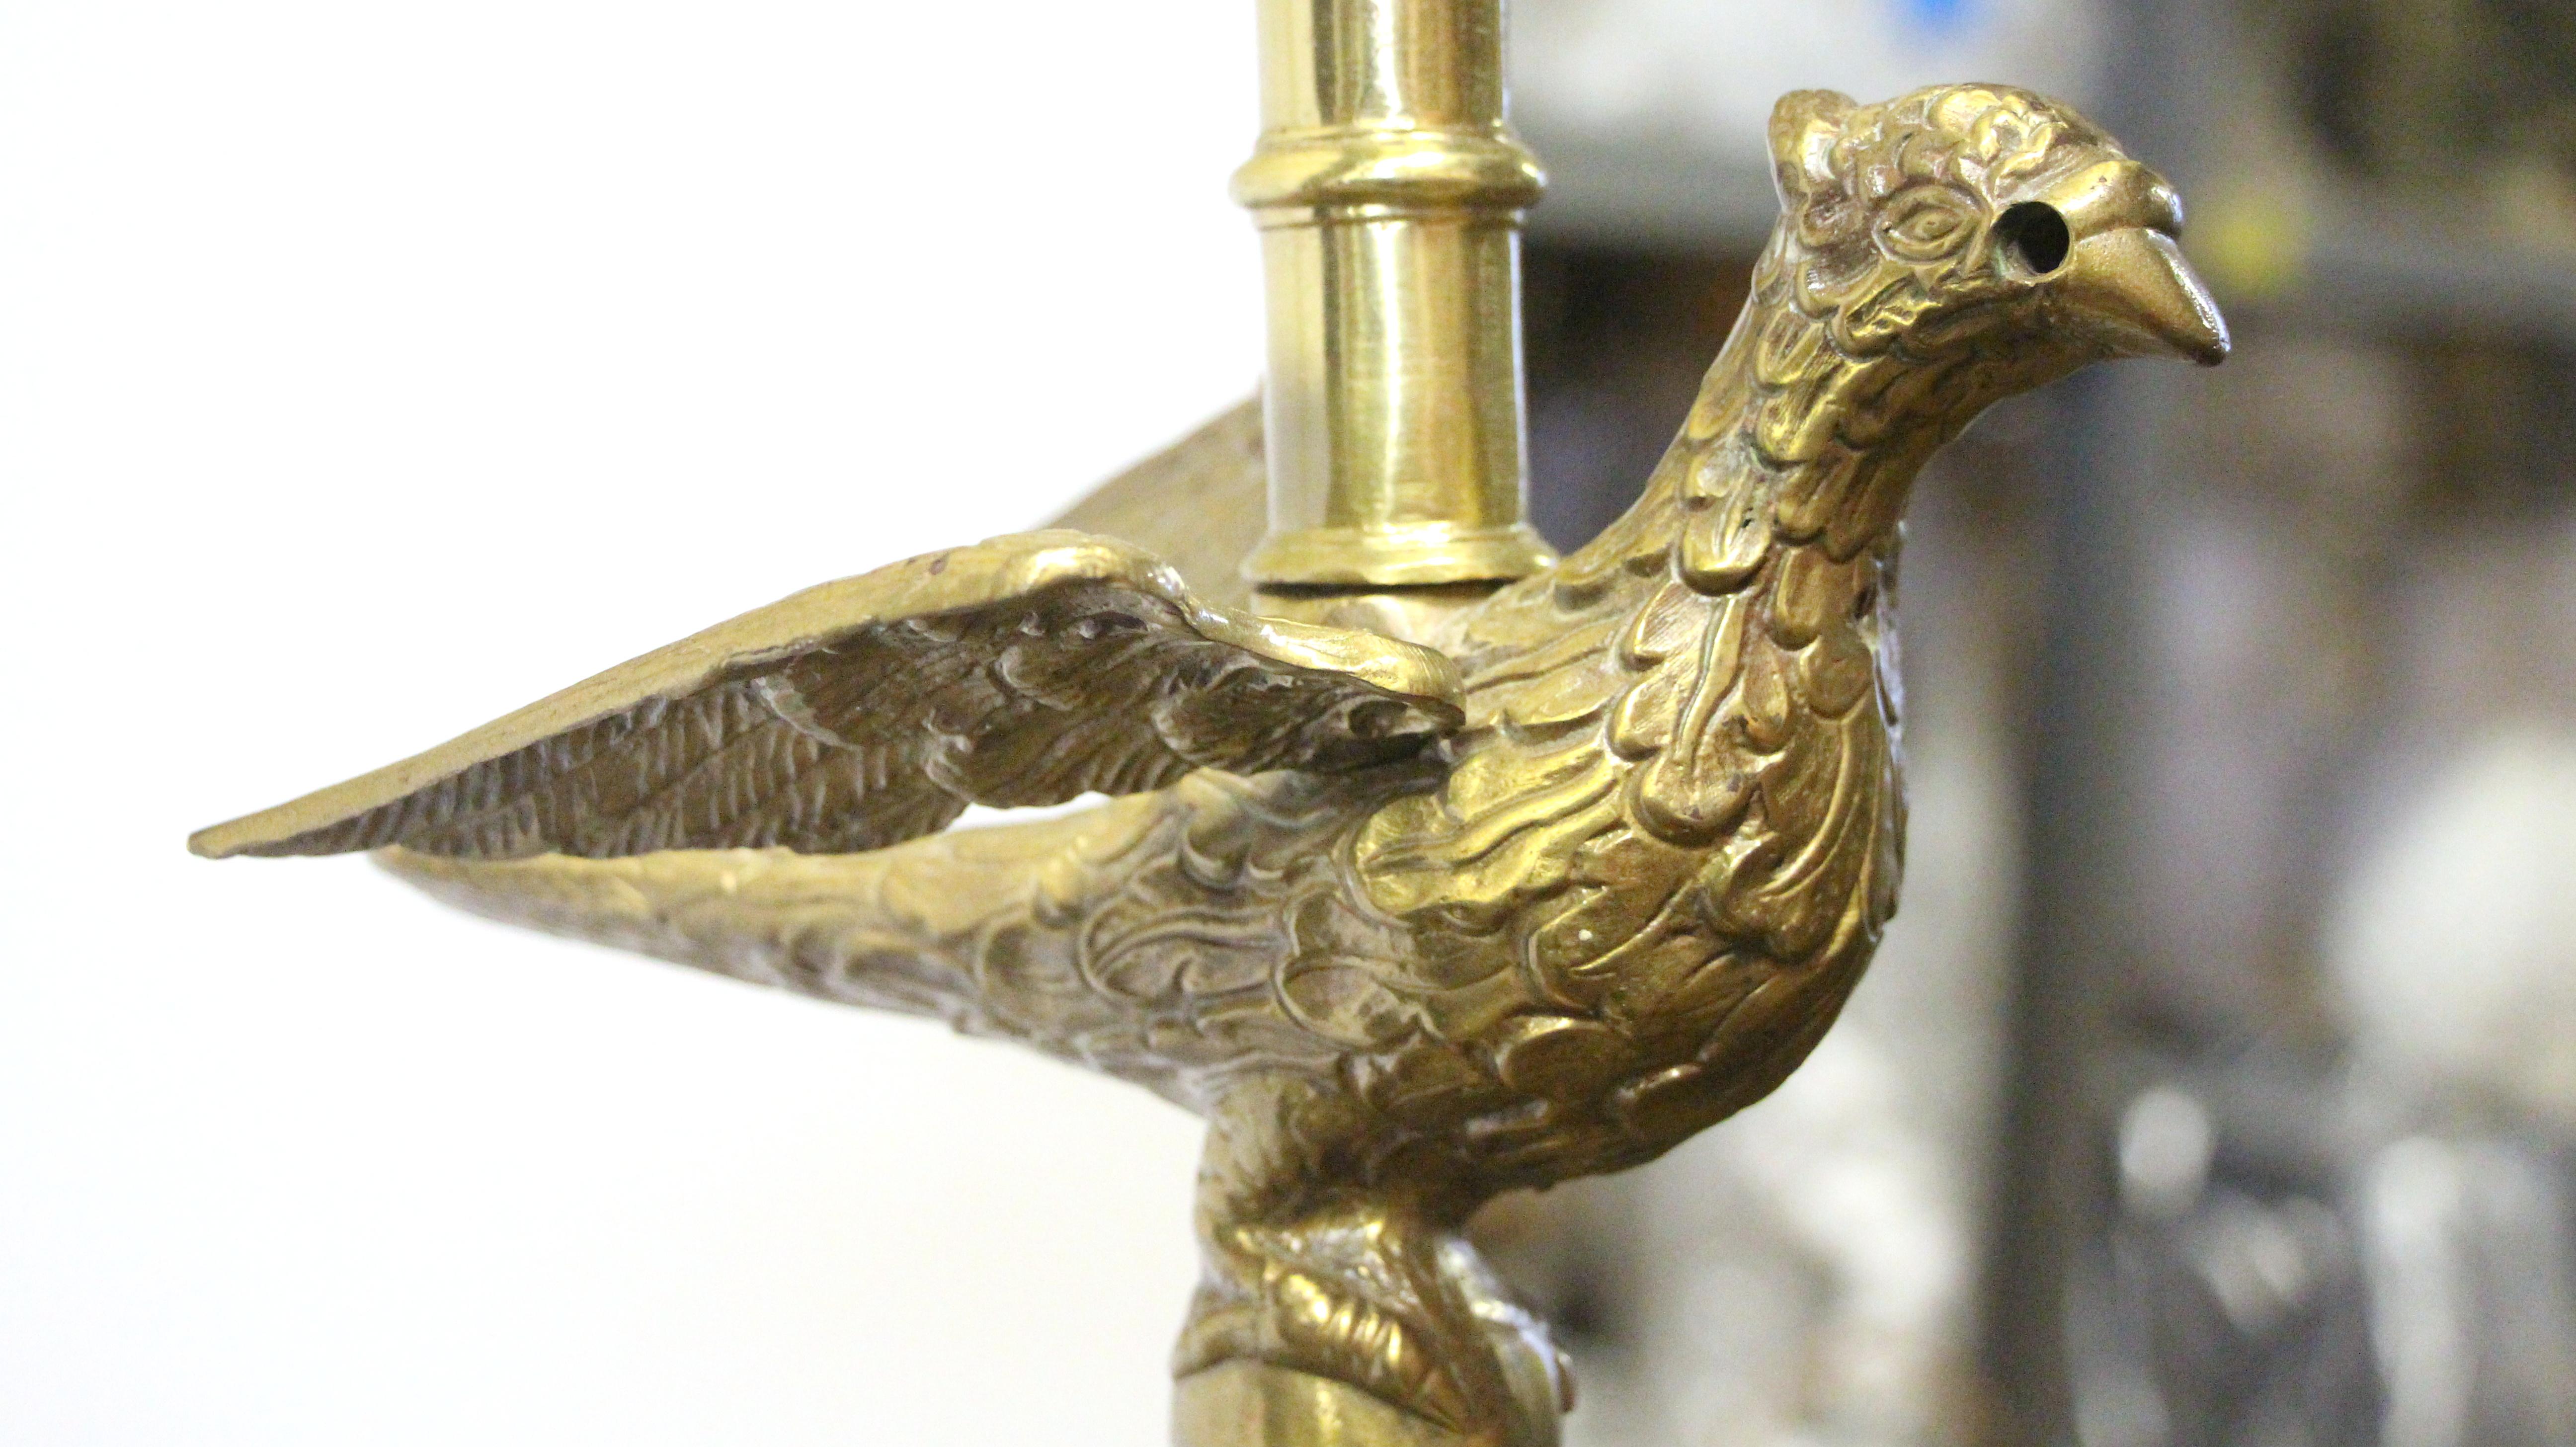 Early 1900s Brass 8-Arm Chandelier from NYC Stock Exchange w/ Eagle Finial 1